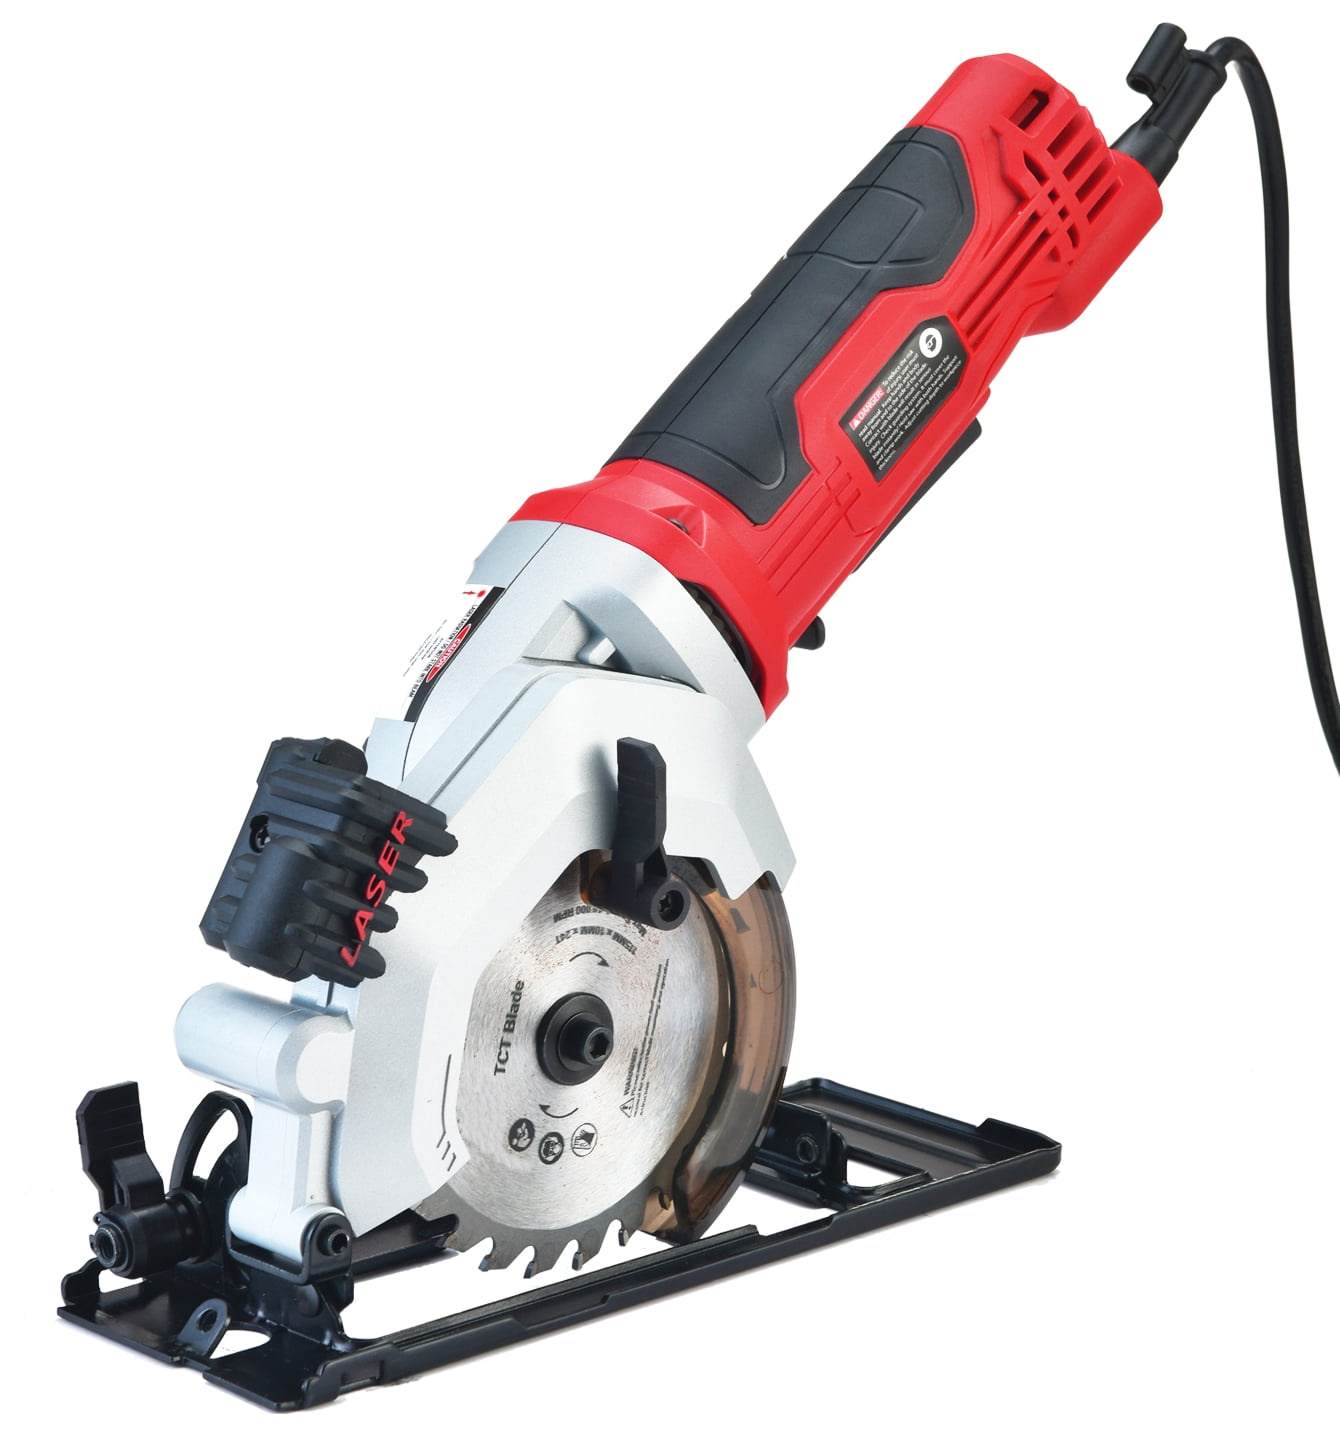 PowerSmart 4-1/2-Inch 4-Amp Electric Compact Circular Saw, Corded, PS4005 